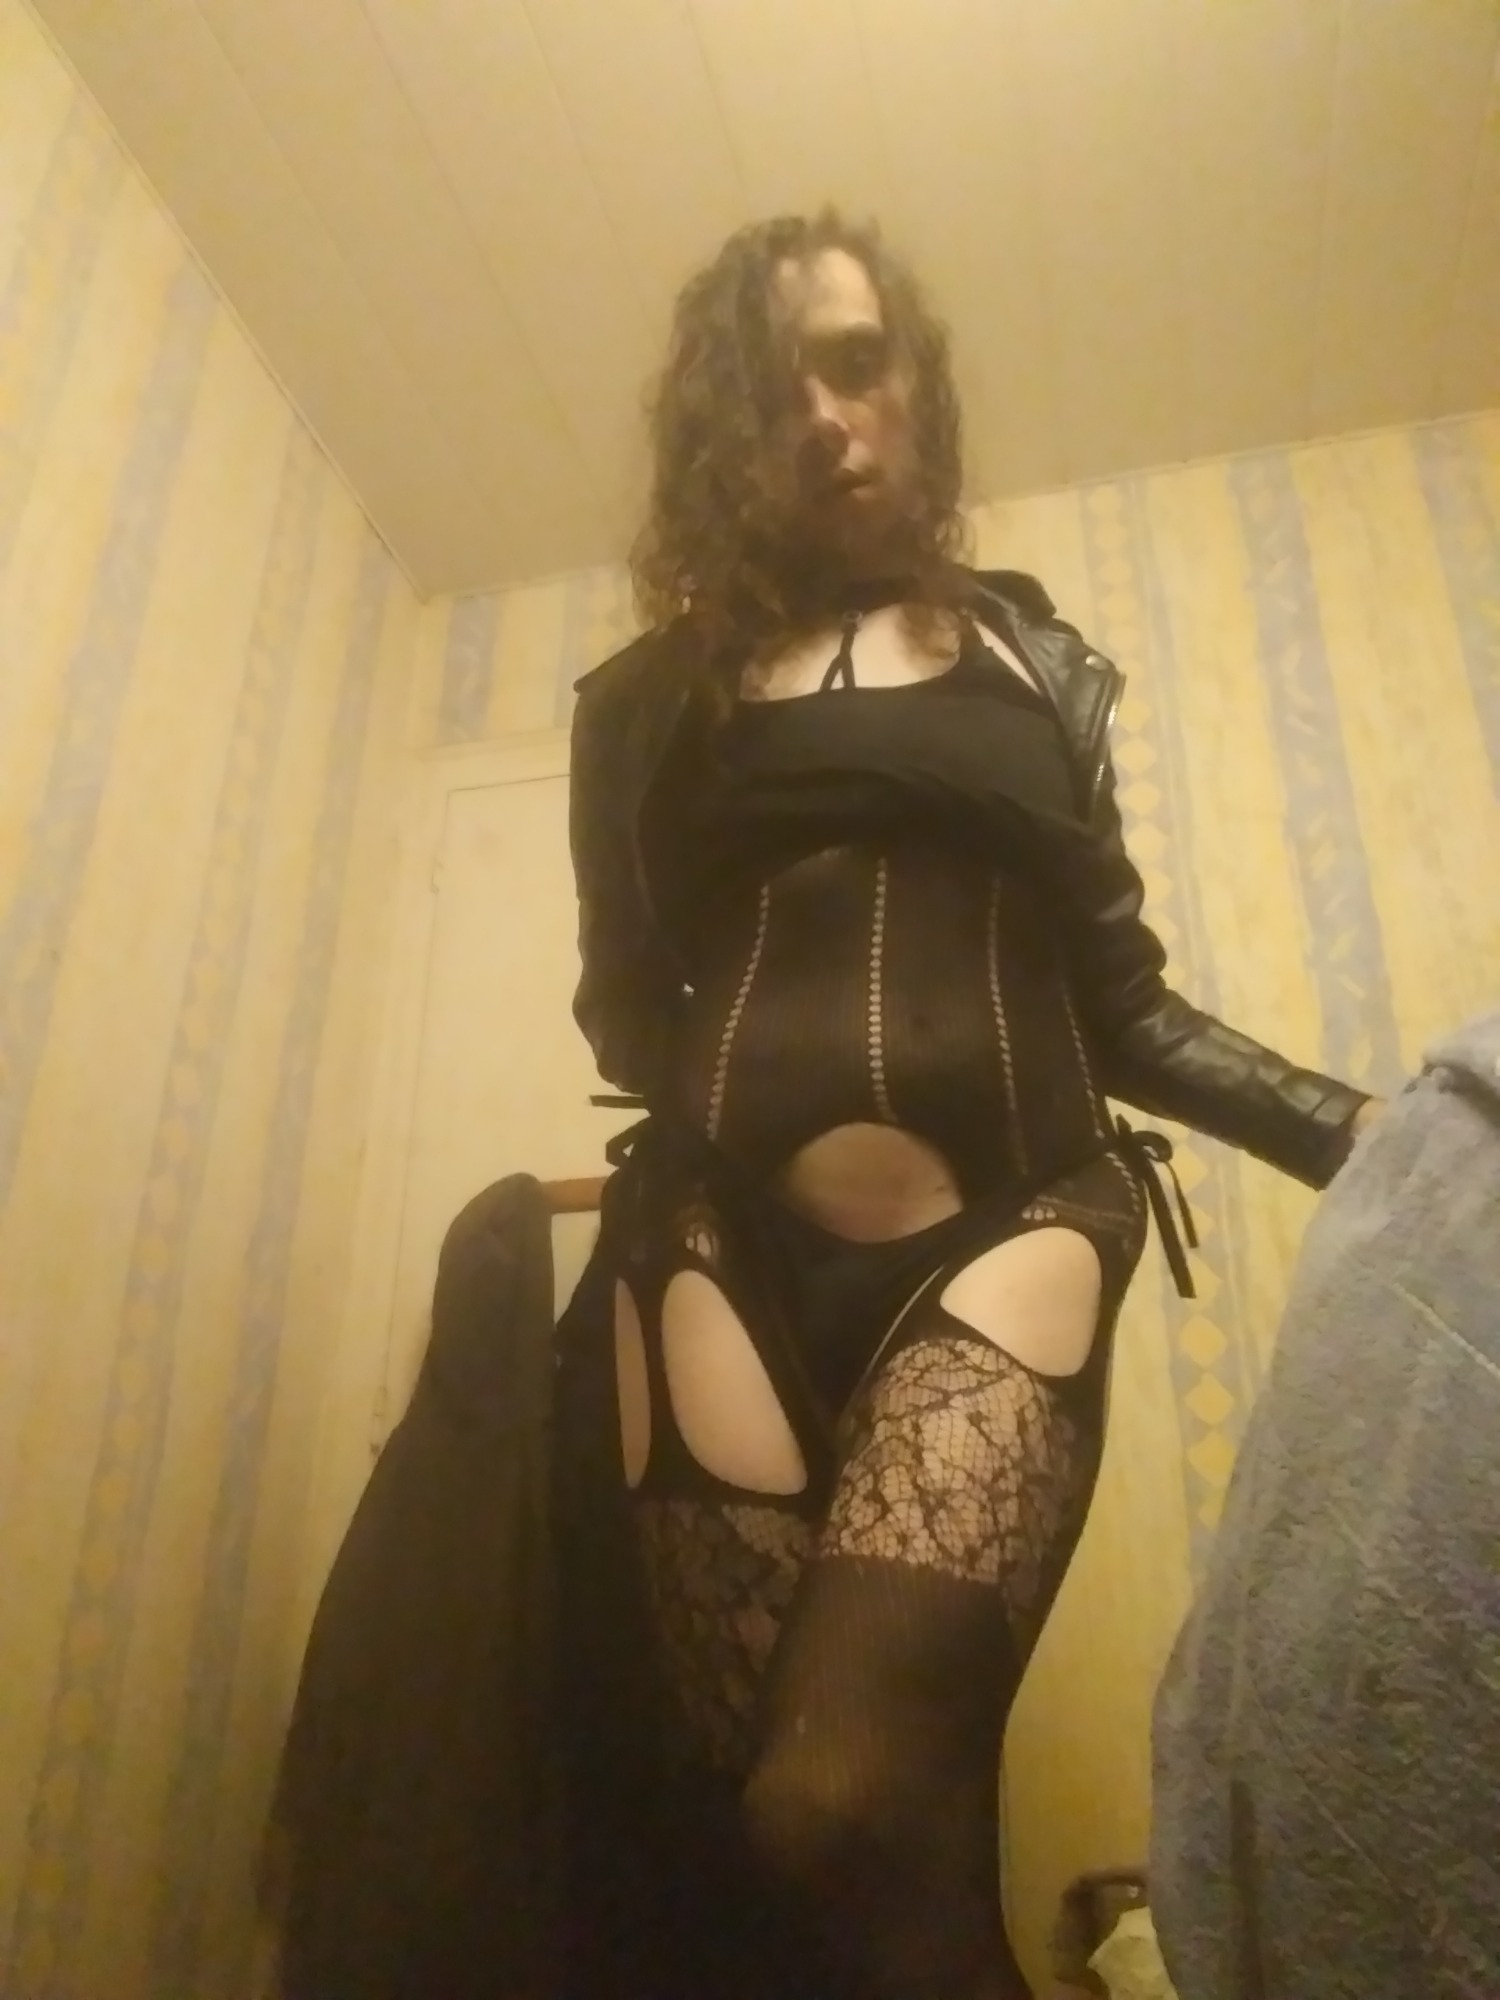 French Sissy to capture at HELLFEST!